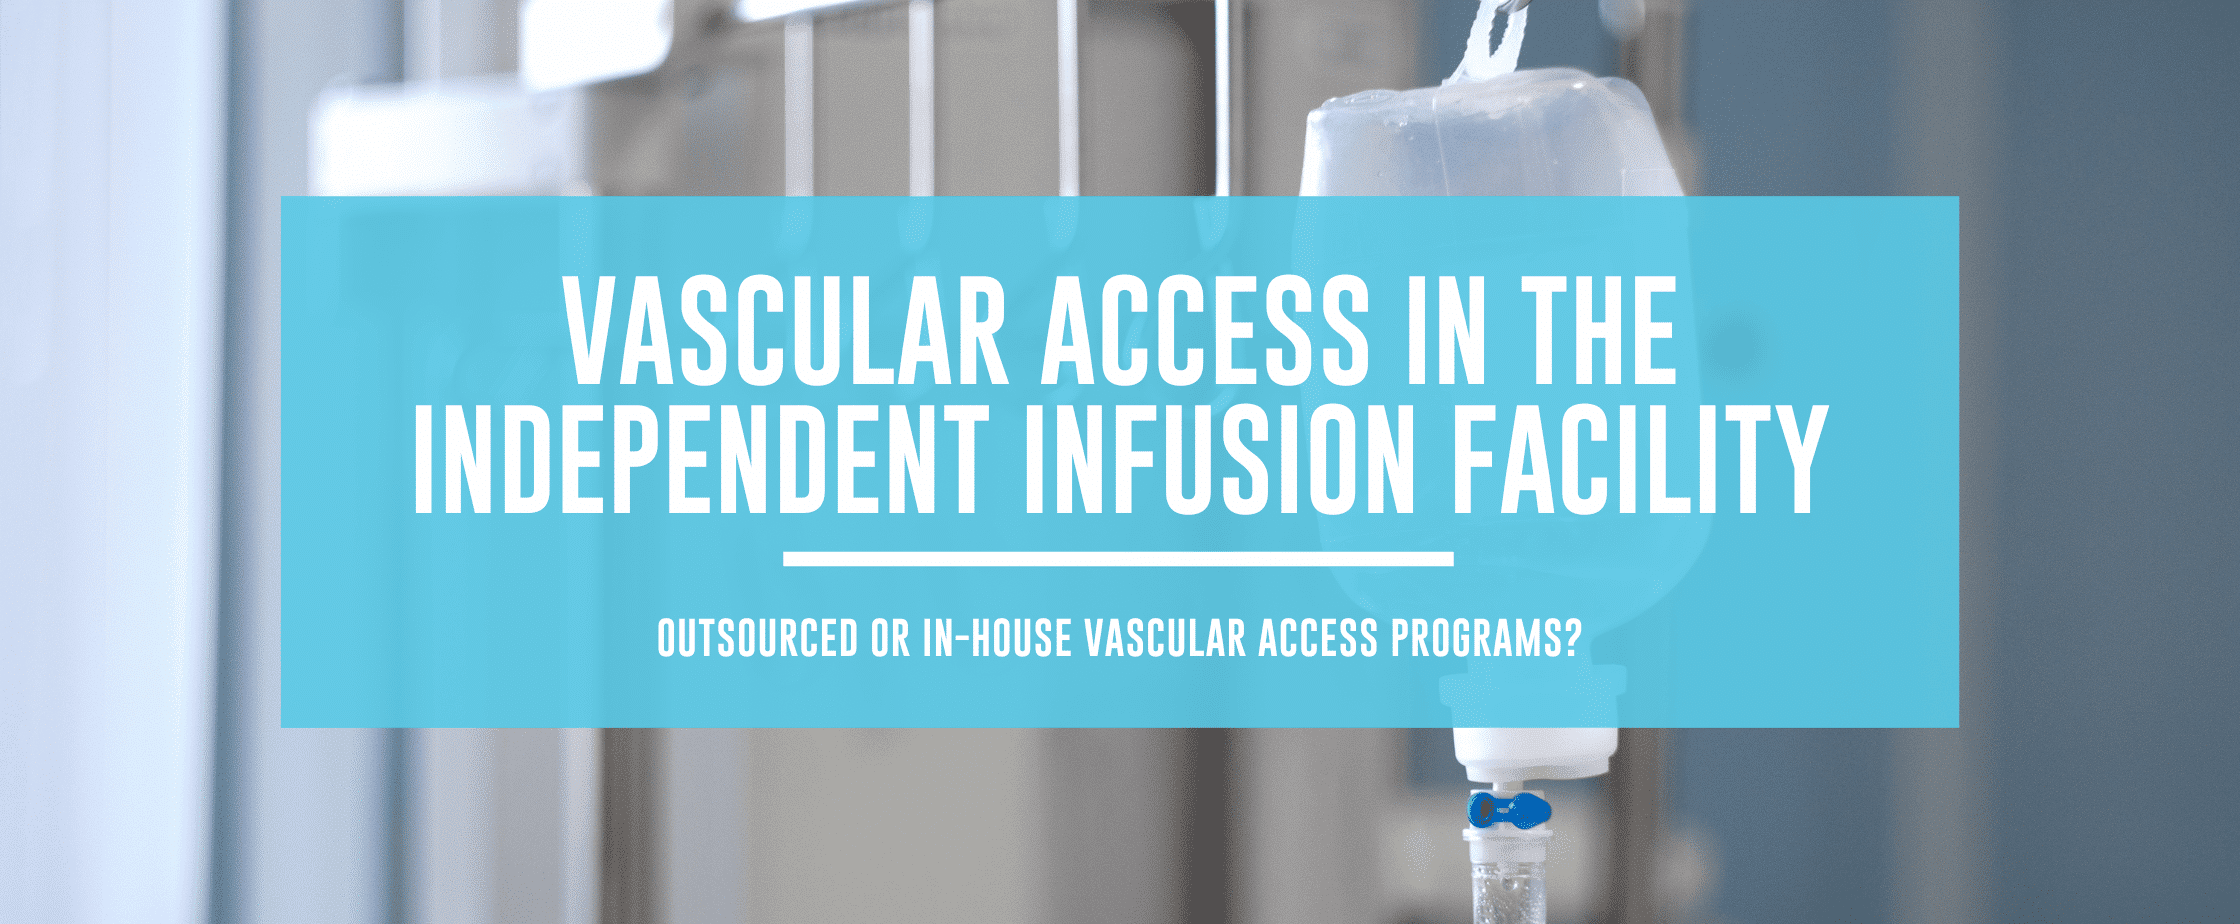 Featured image for Vascular Access In the Independent Infusion Facility